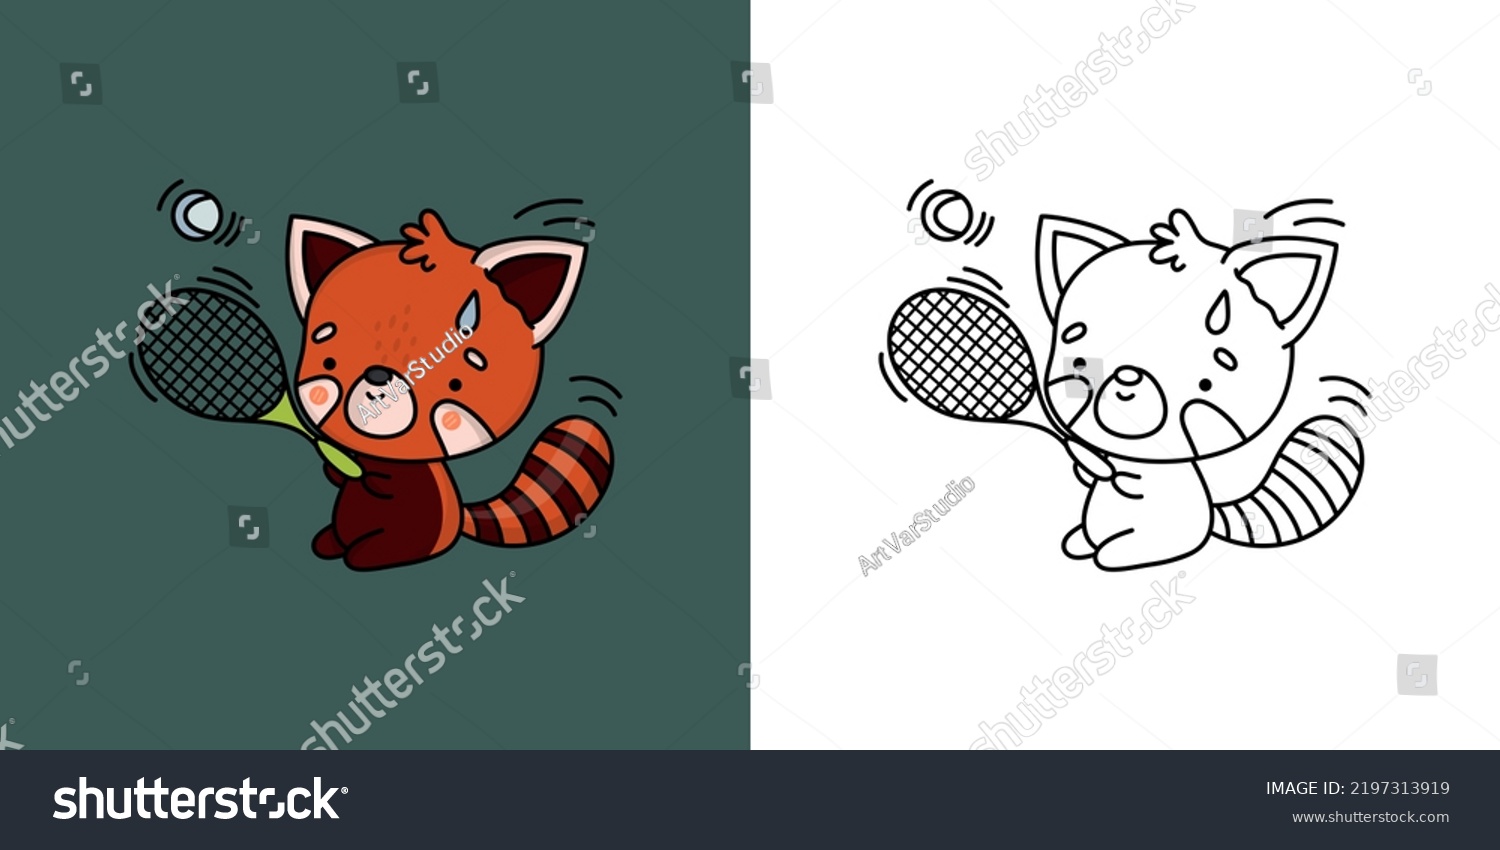 SVG of Cute Red Panda Athlete Clipart for Coloring Page and Illustration. Happy Animal Sportsman. Vector Illustration of a Kawaii Animal for Stickers, Prints for Clothes, Baby Shower, Coloring Pages.
 svg